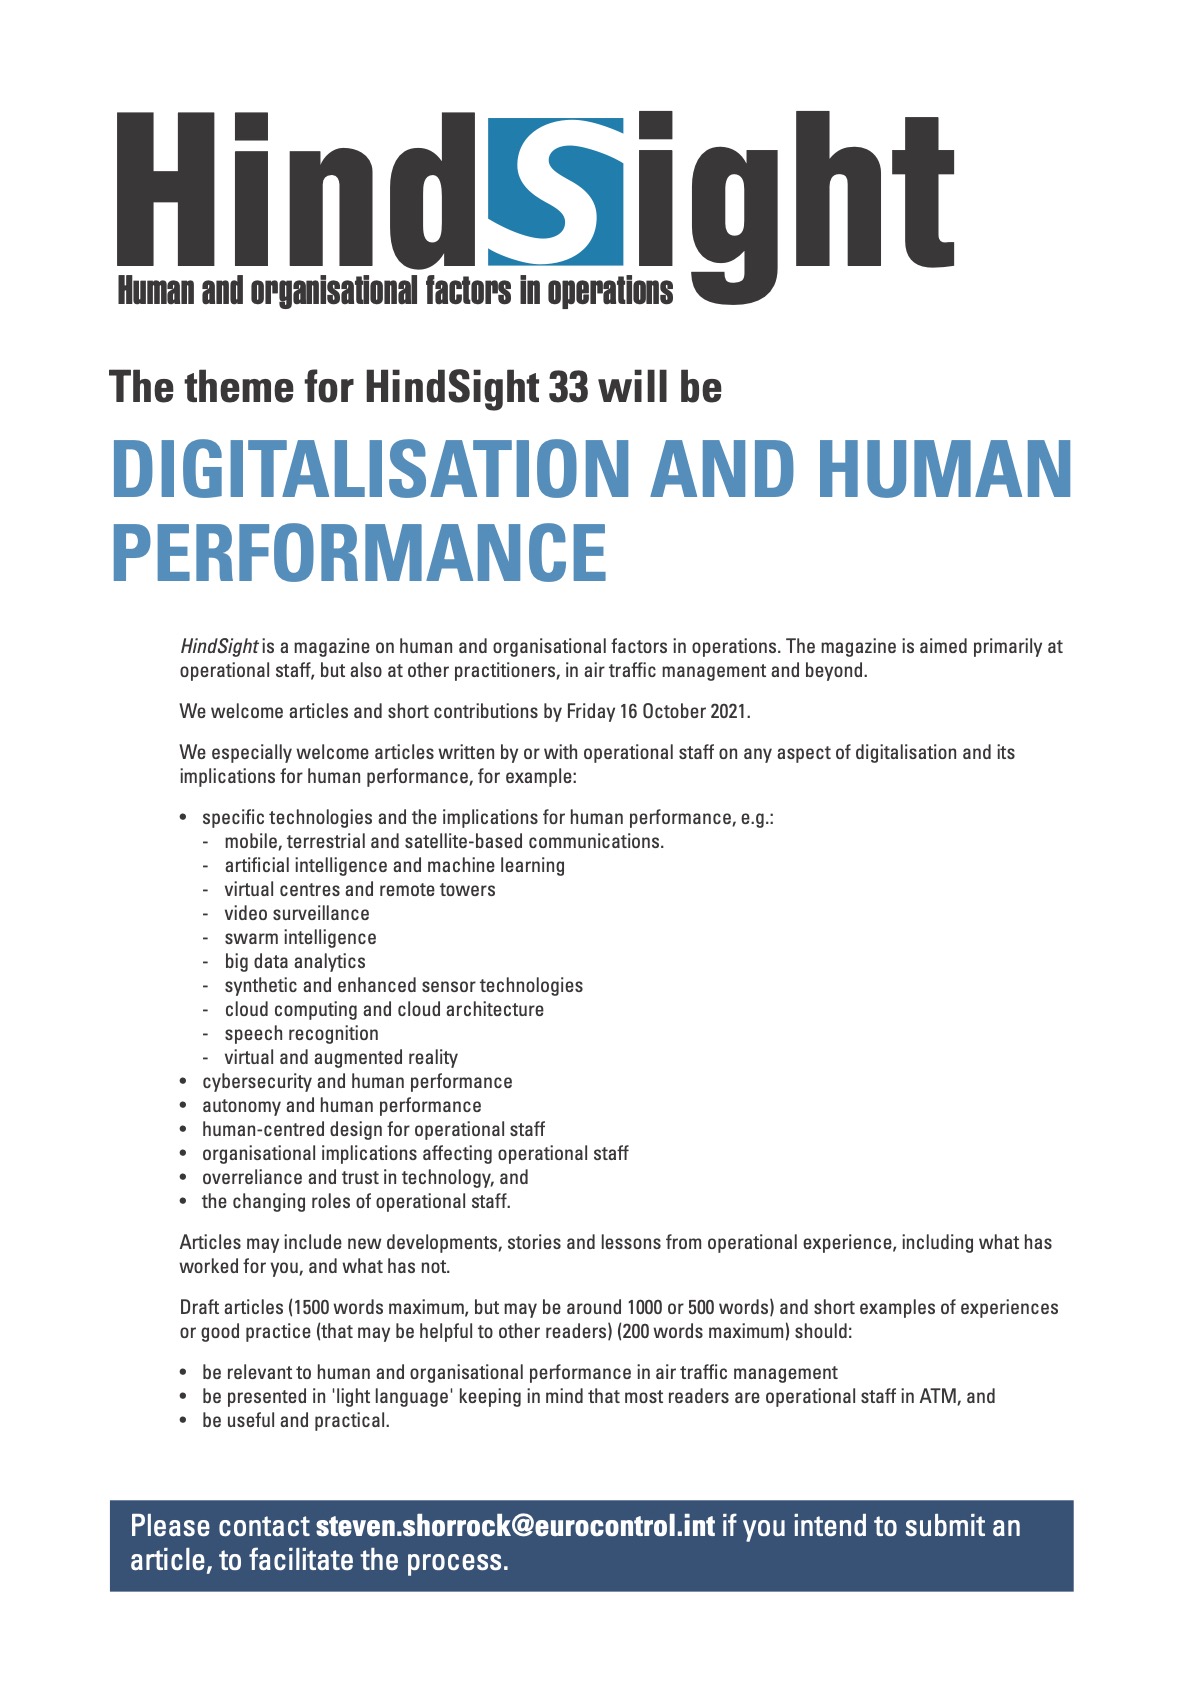 Steven Shorrock on Twitter: "The theme for #HindSightMagazine issue 33 will be DIGITALISATION AND HUMAN PERFORMANCE HindSight is a magazine on human and organisational factors in operations, in traffic management and